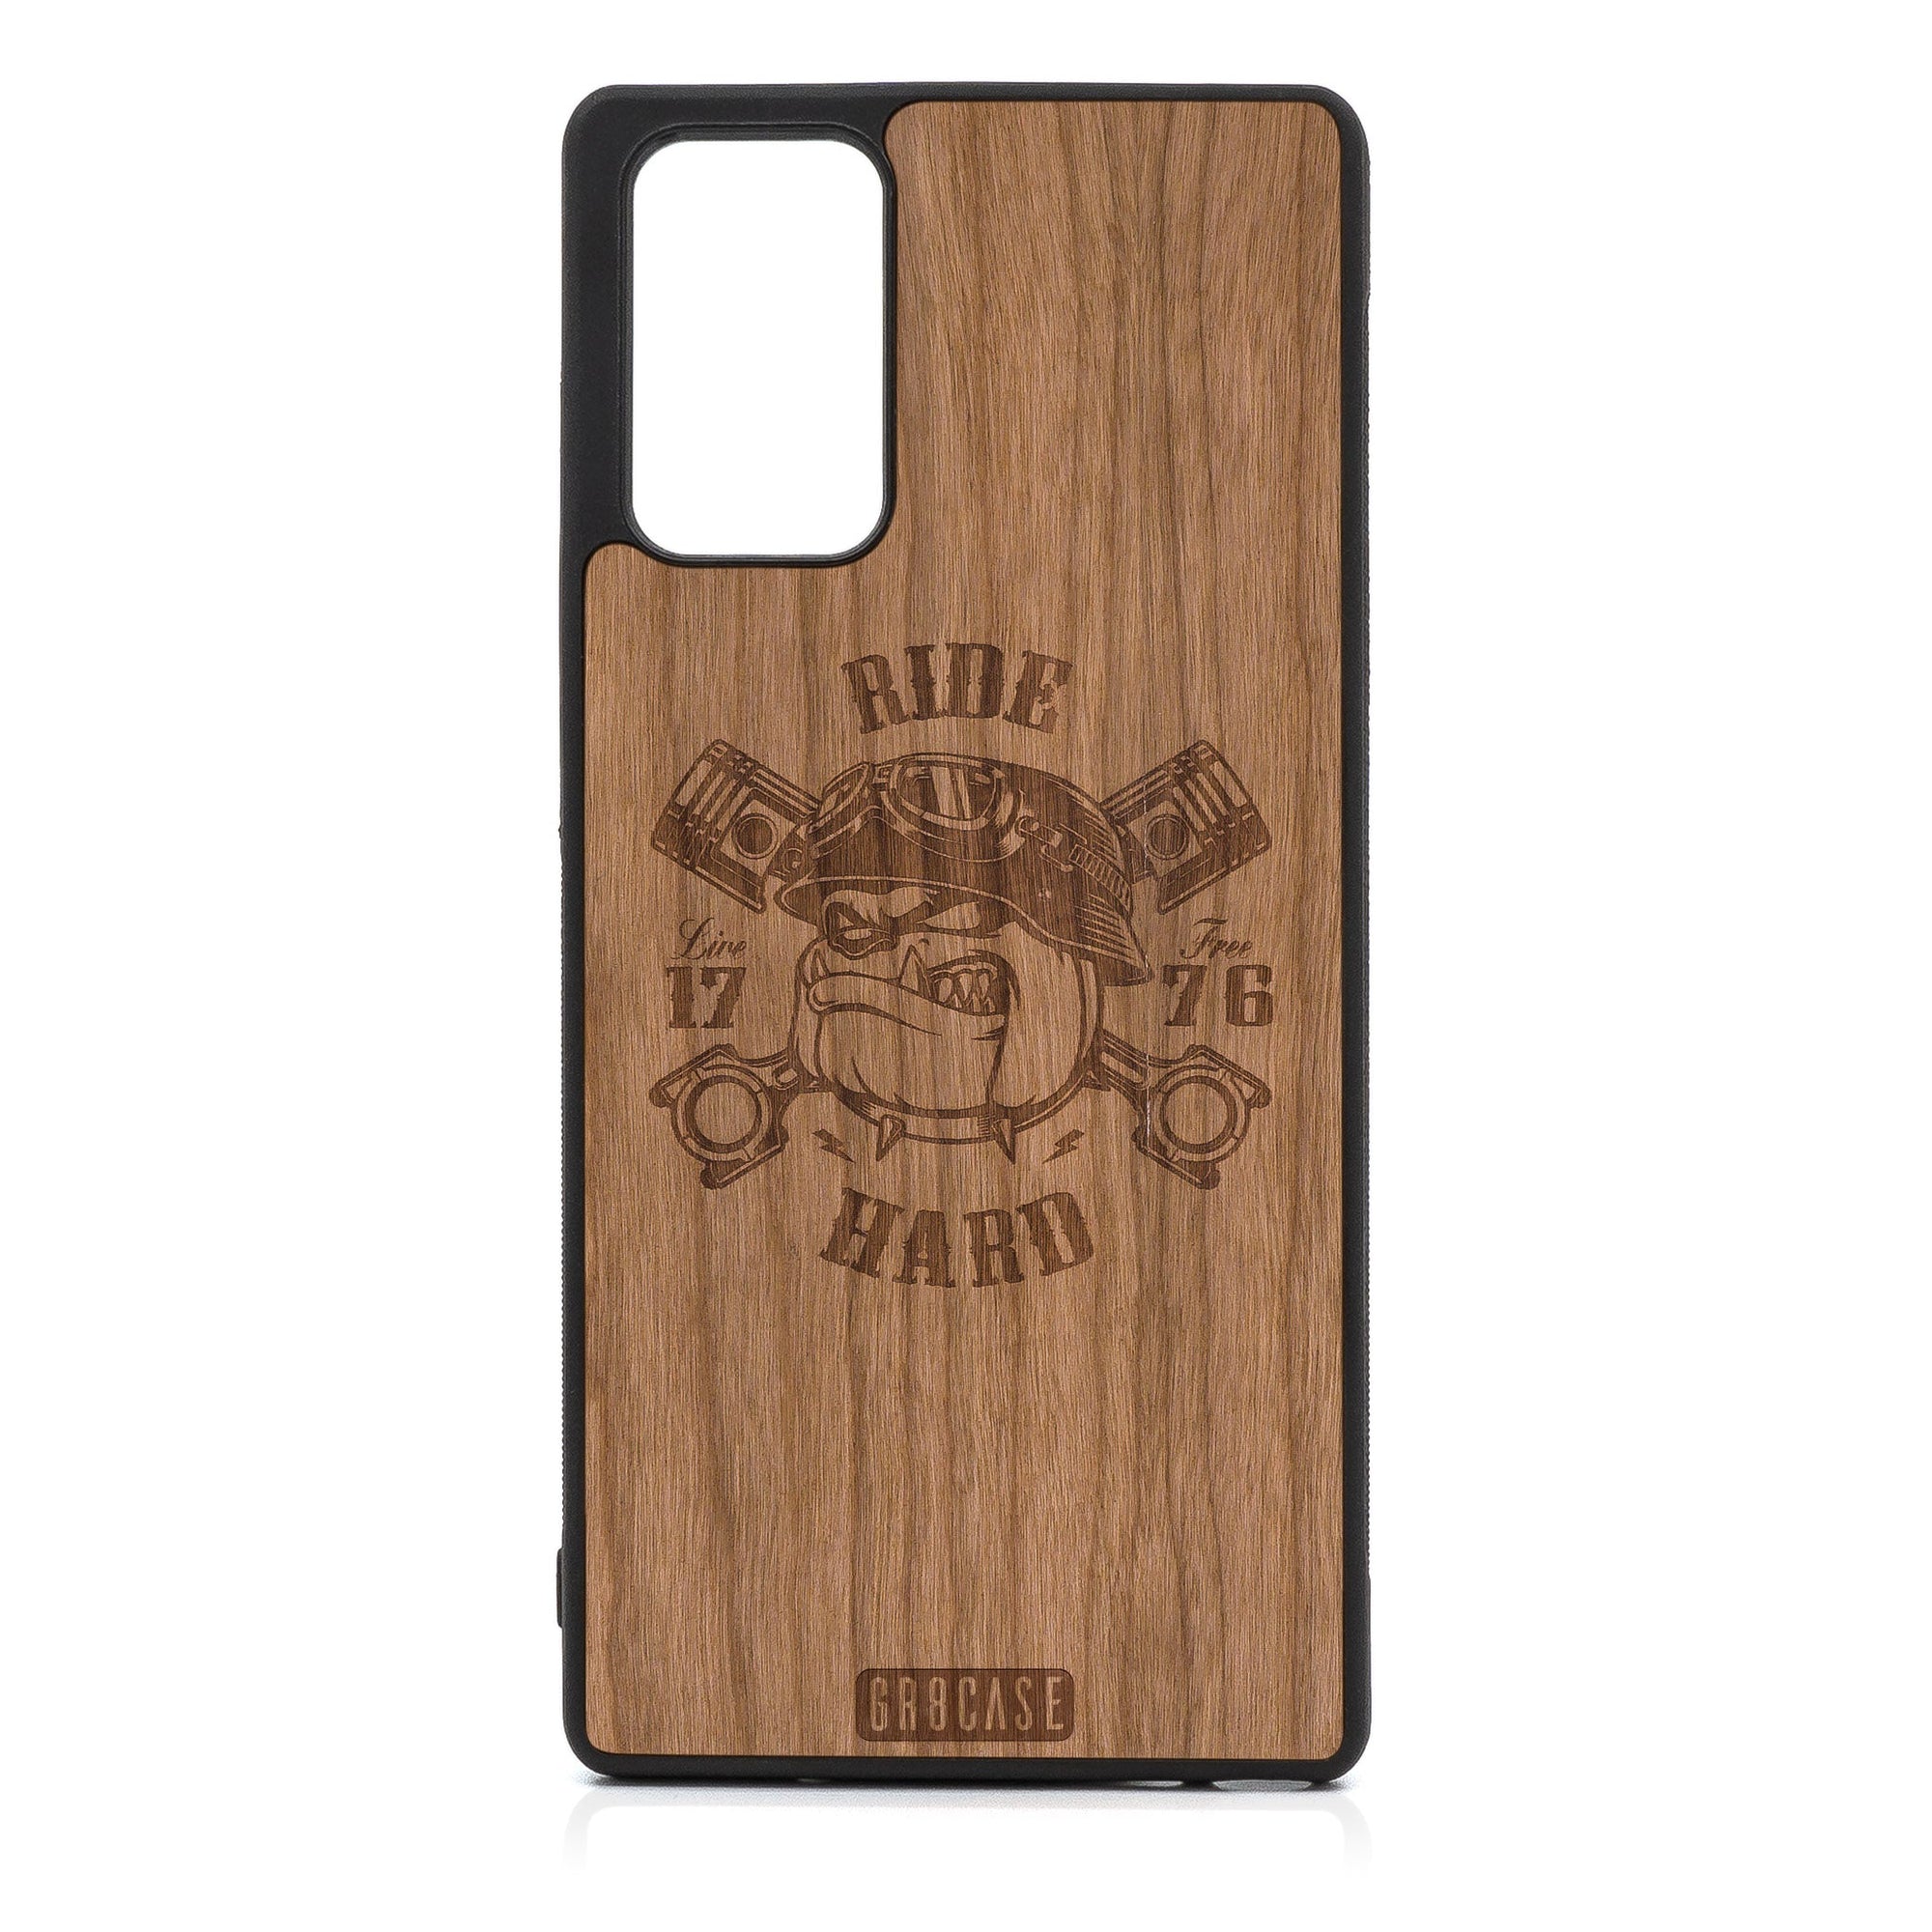 Ride Hard Live Free Design Wood Case For Samsung Galaxy A52 5G